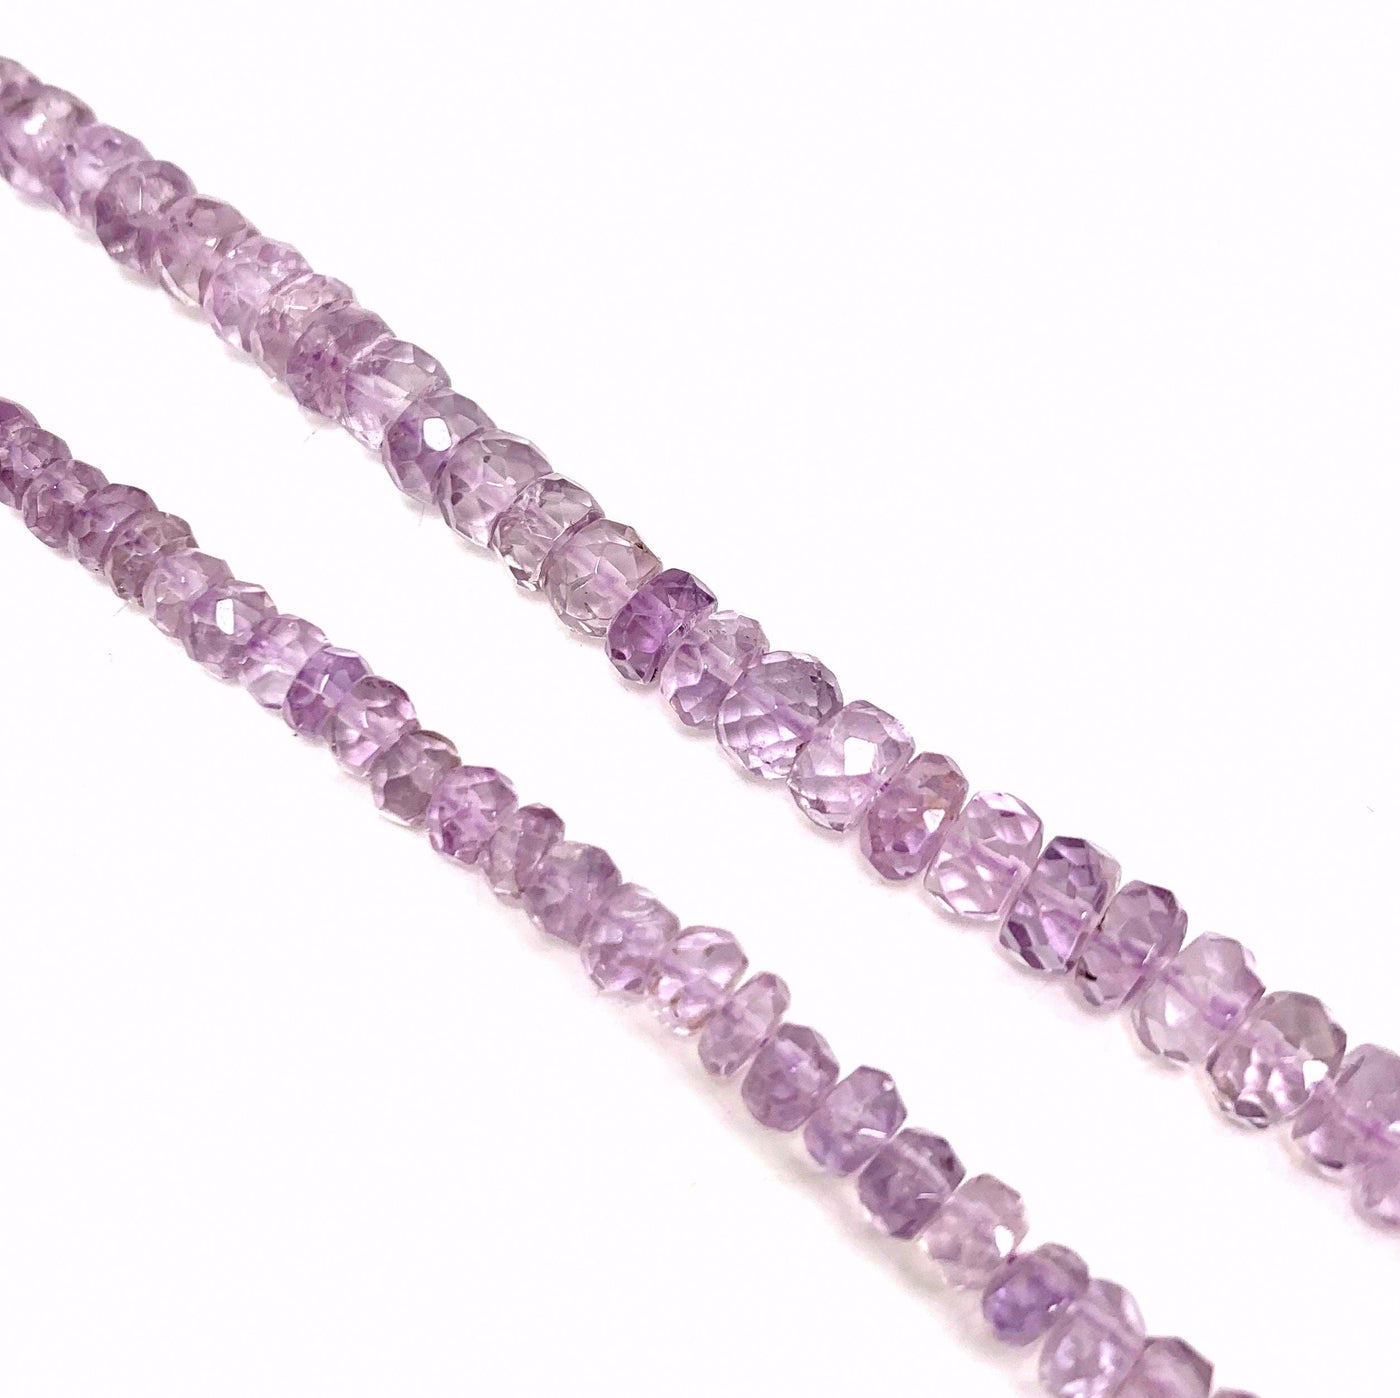 Both amethyst bead strands ( left small, right large) on a white background